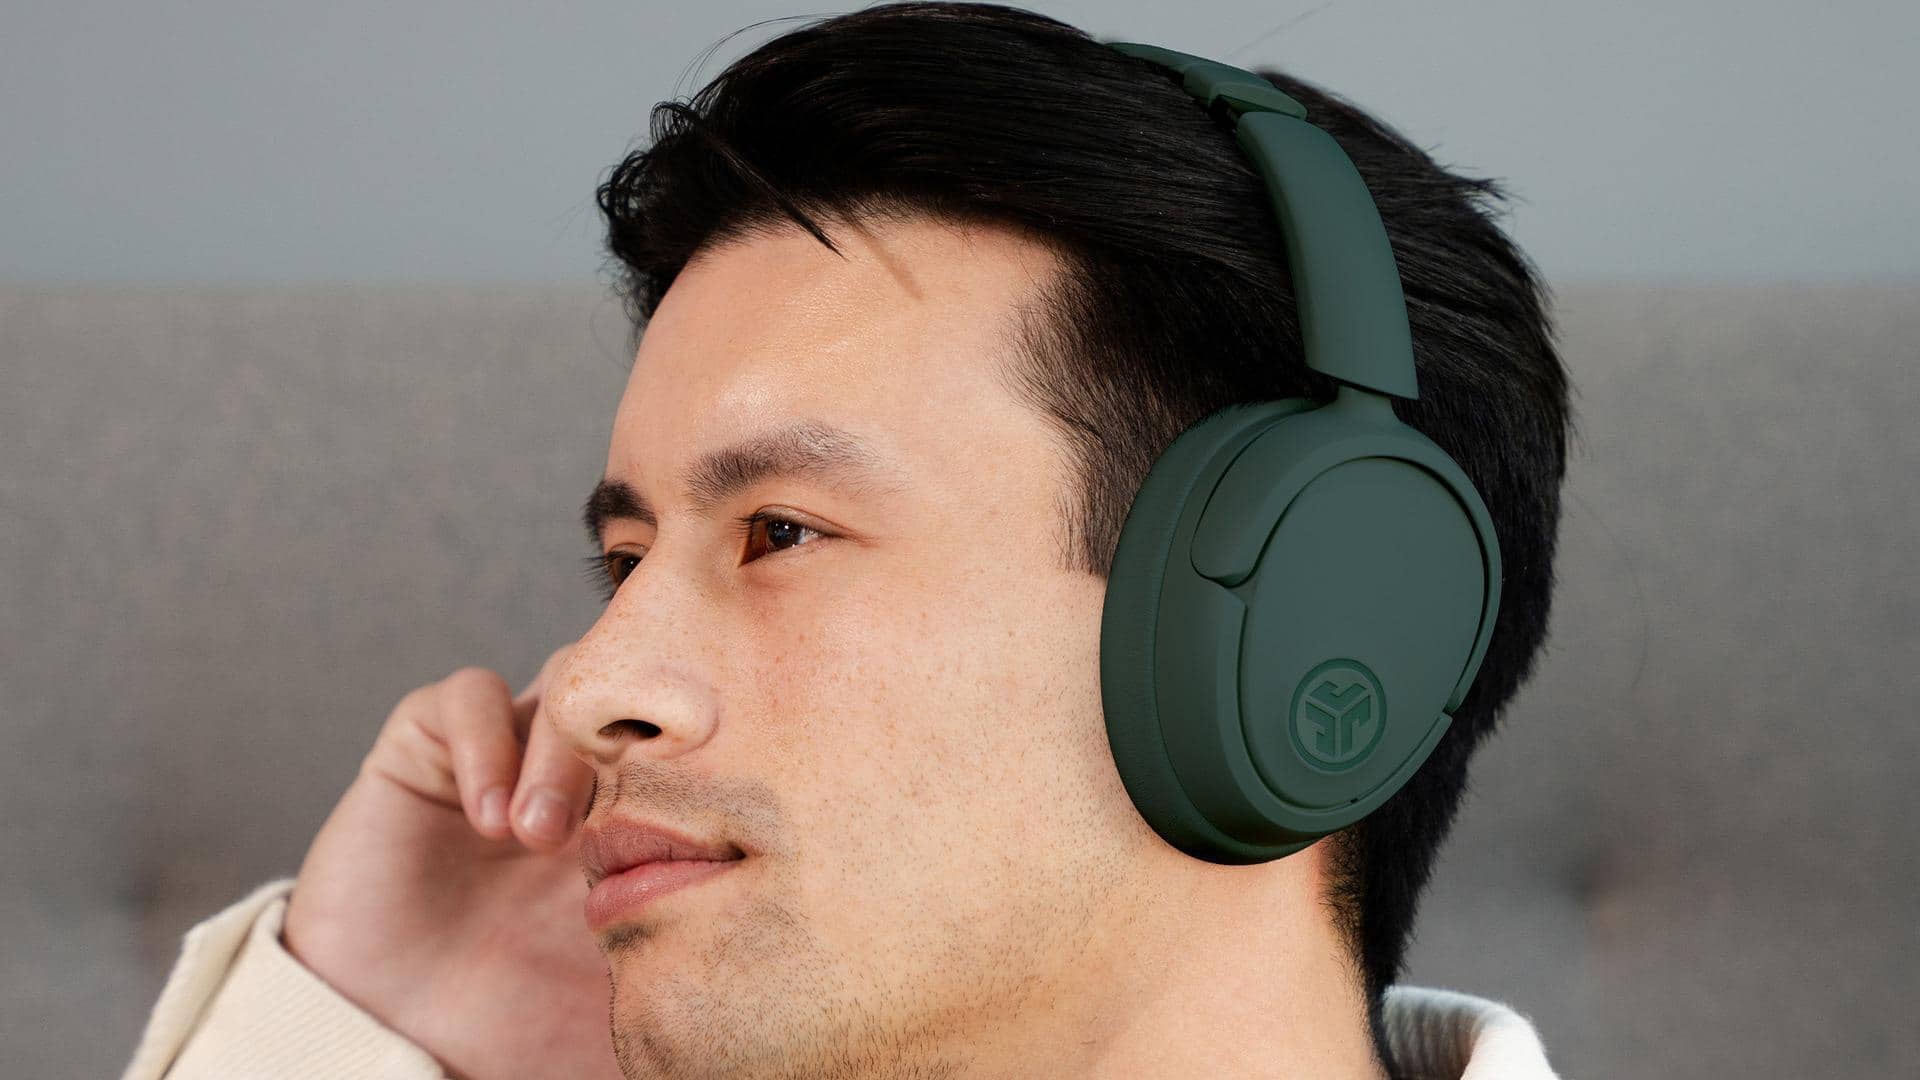 JLab launches premium headphones with active noise cancellation at $80